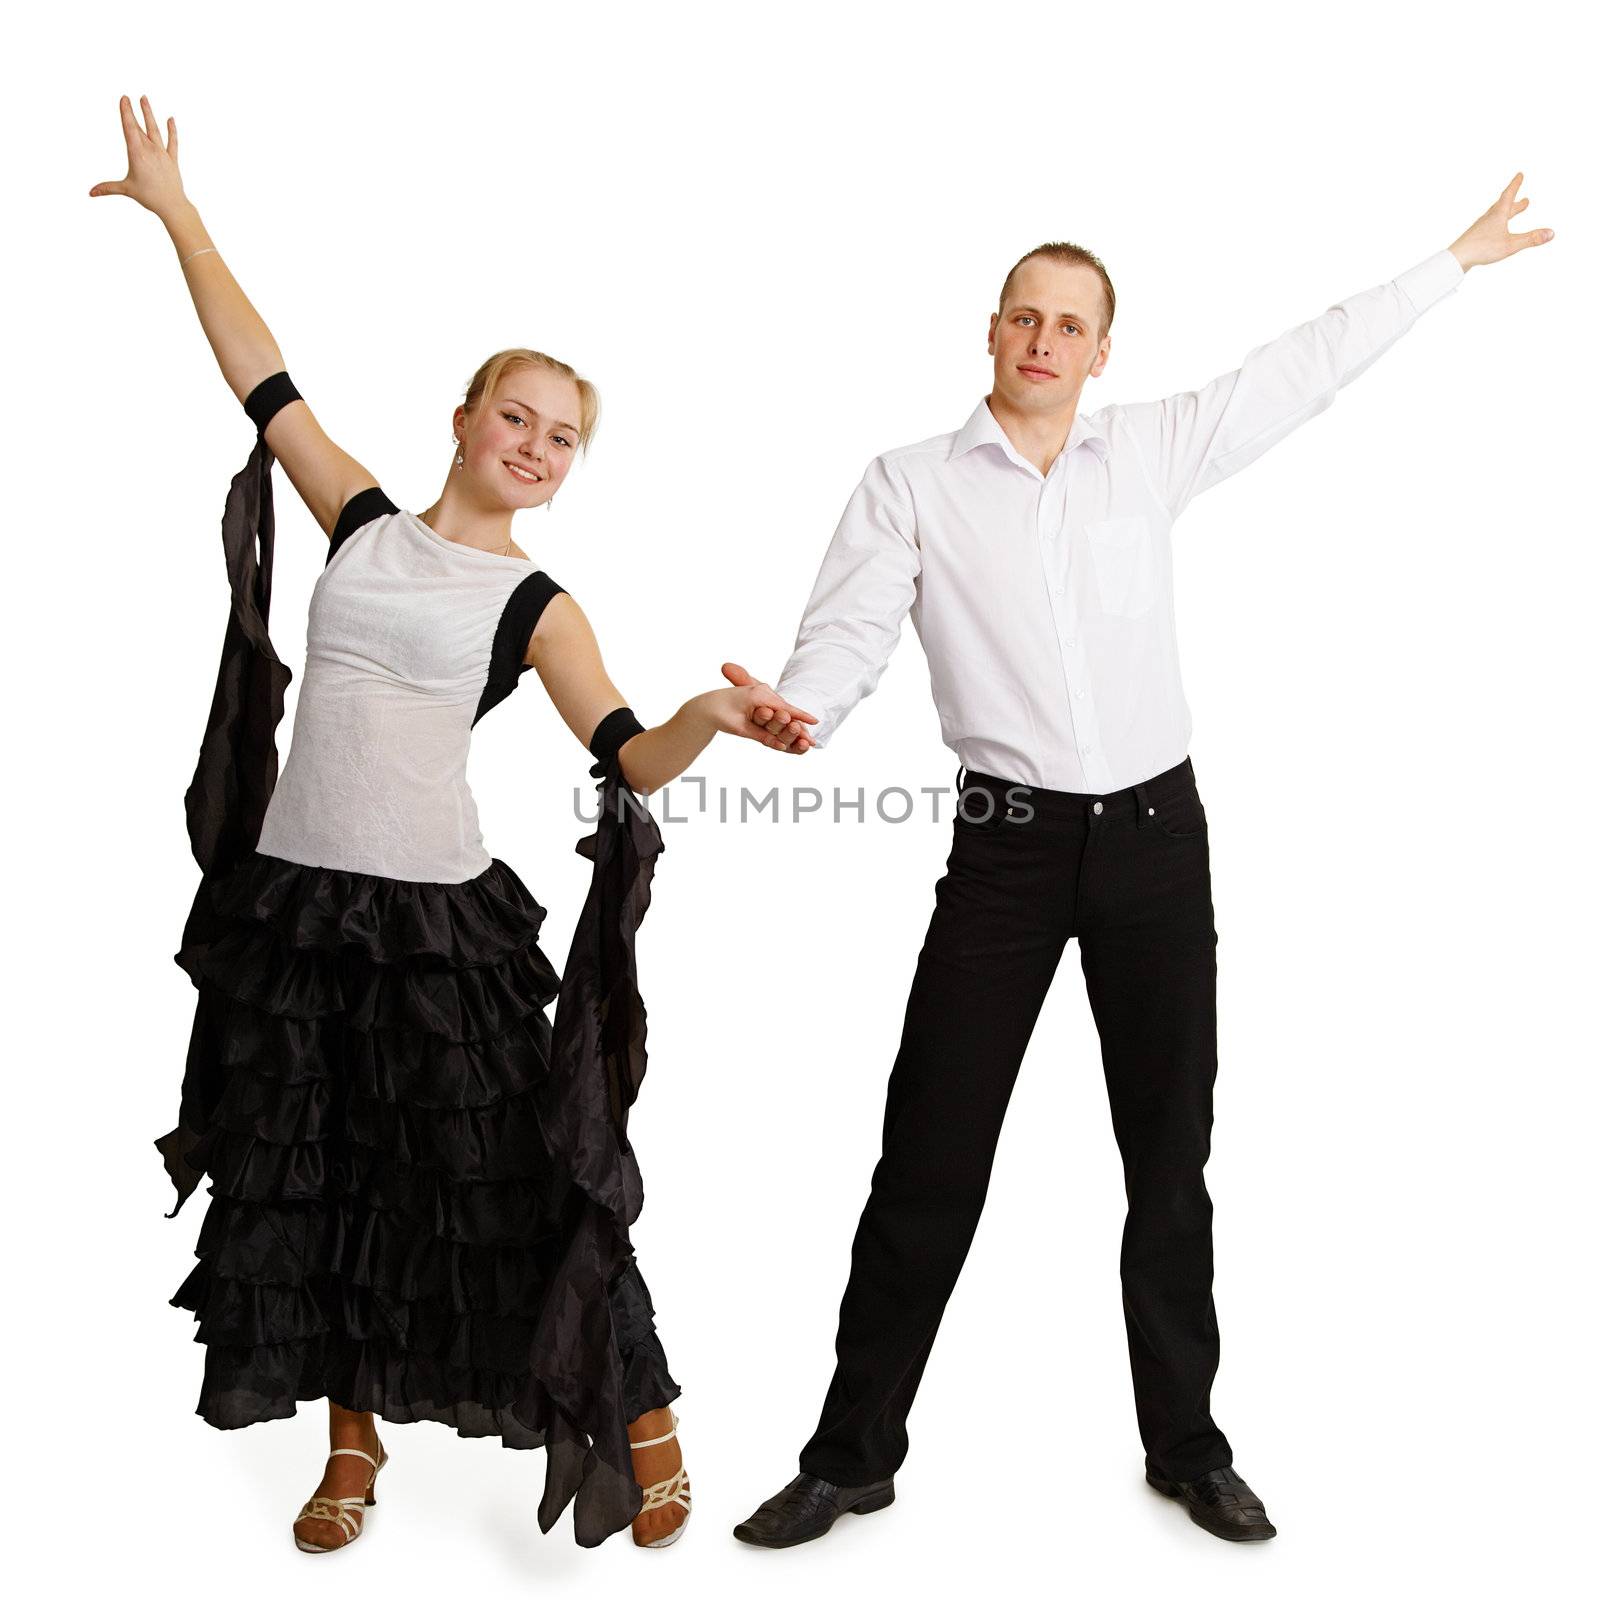 A pair of professional dancers finished dancing isolated on white background